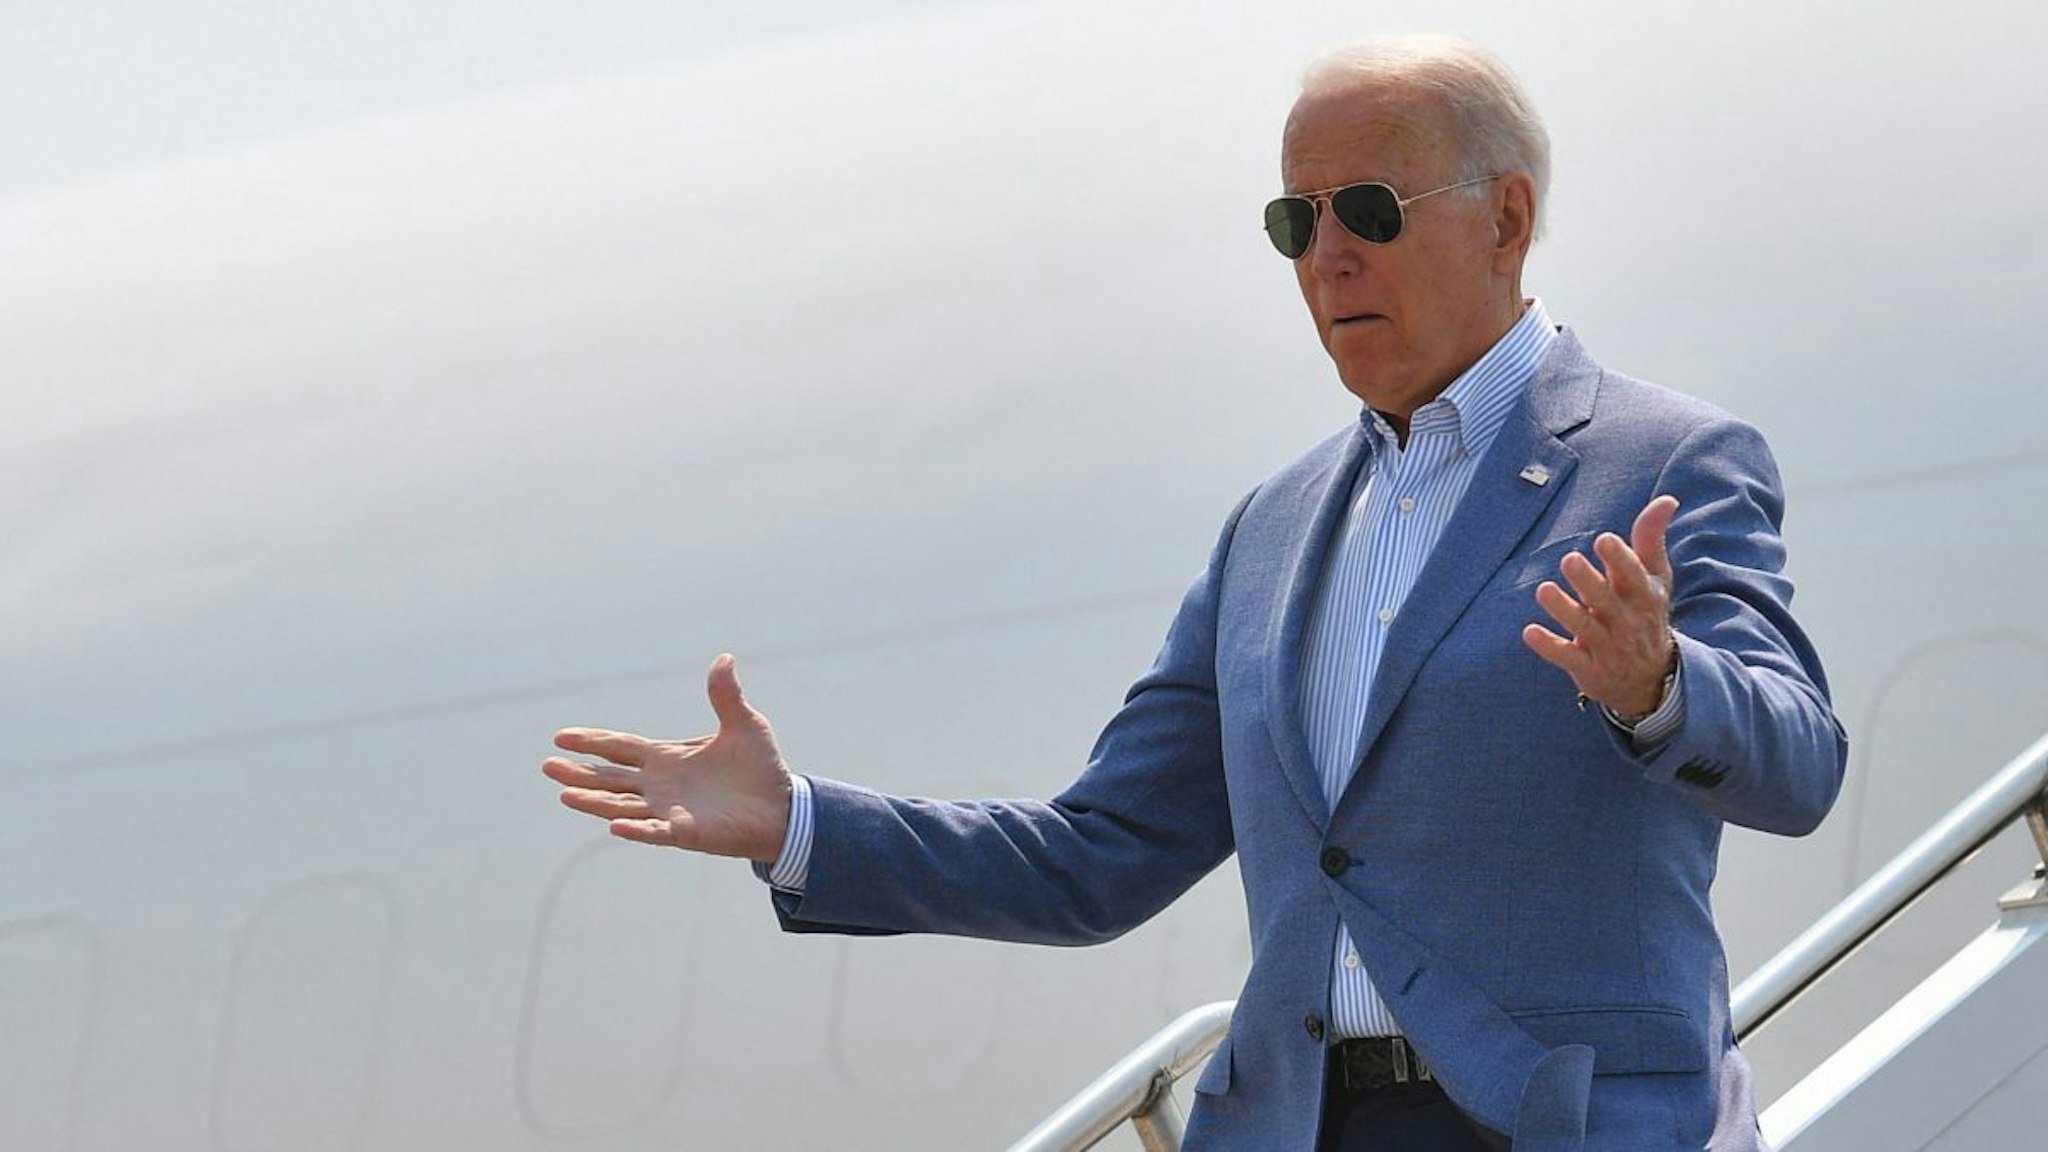 US President Joe Biden steps off Air Force One upon arrival at Cherry Capital Airport in Traverse City, Michigan on July 3, 2021.